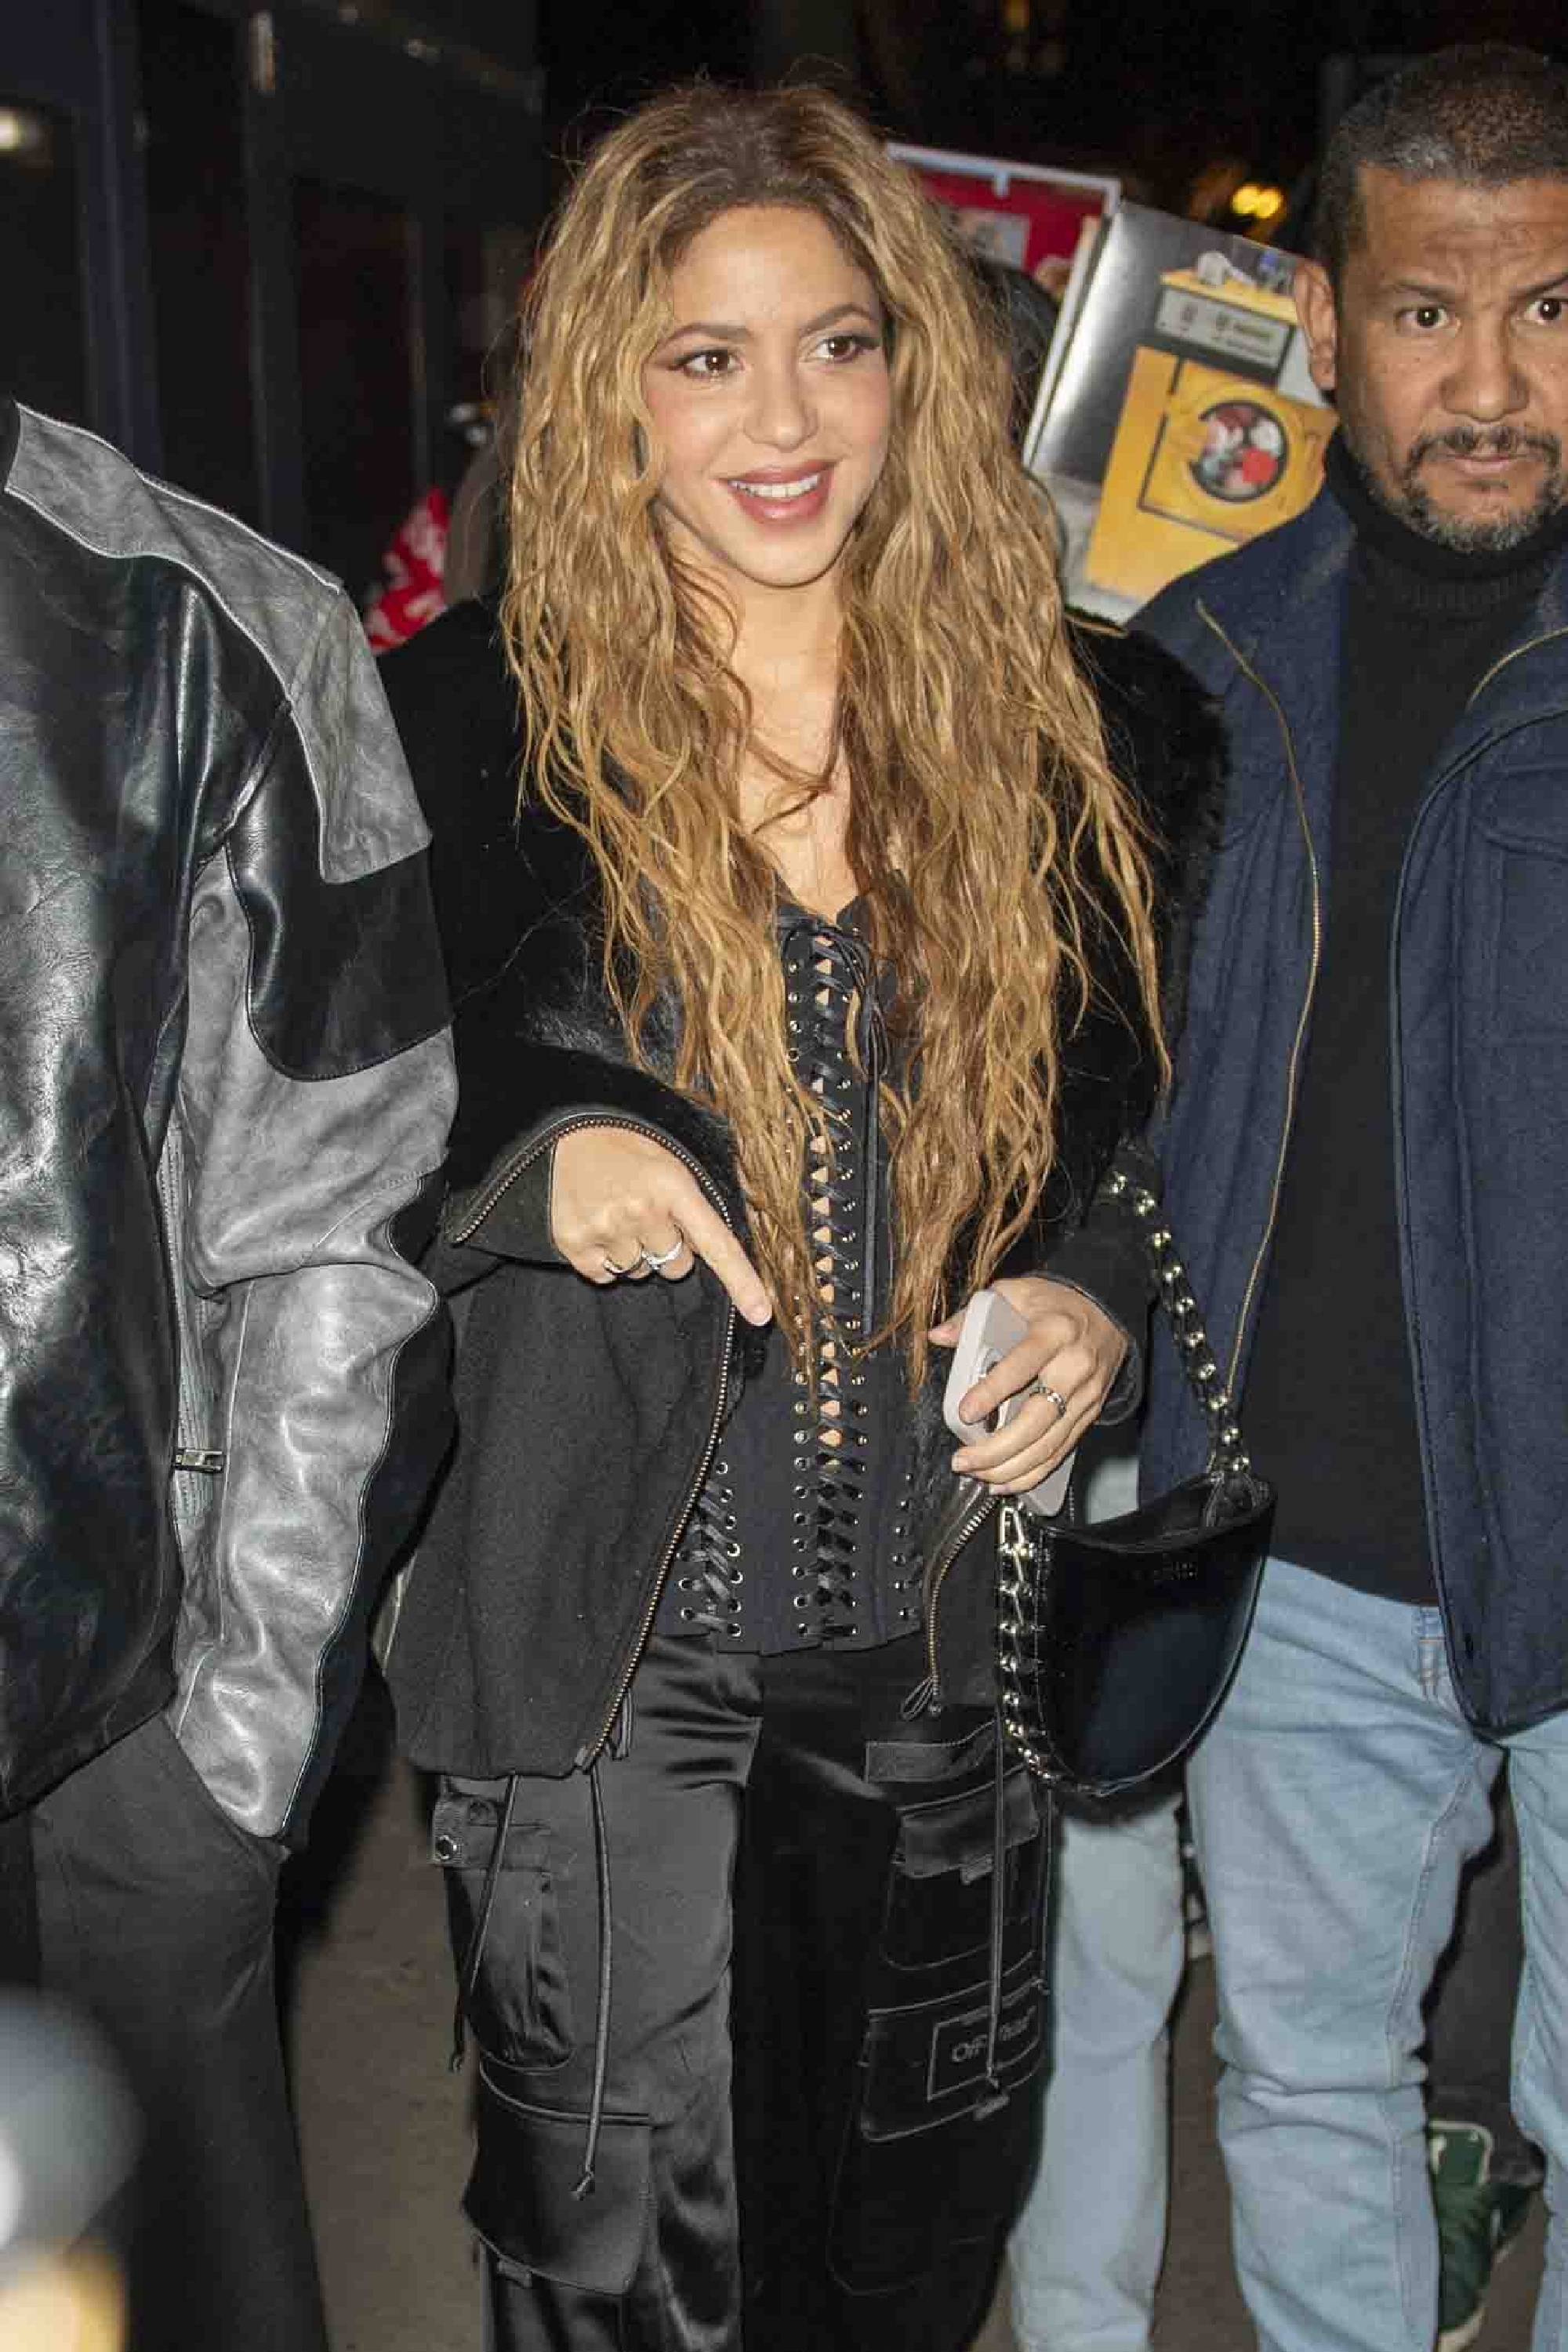 Shakira smiles in a laced outfit and carries a handbag, accompanied by a man on a street at night